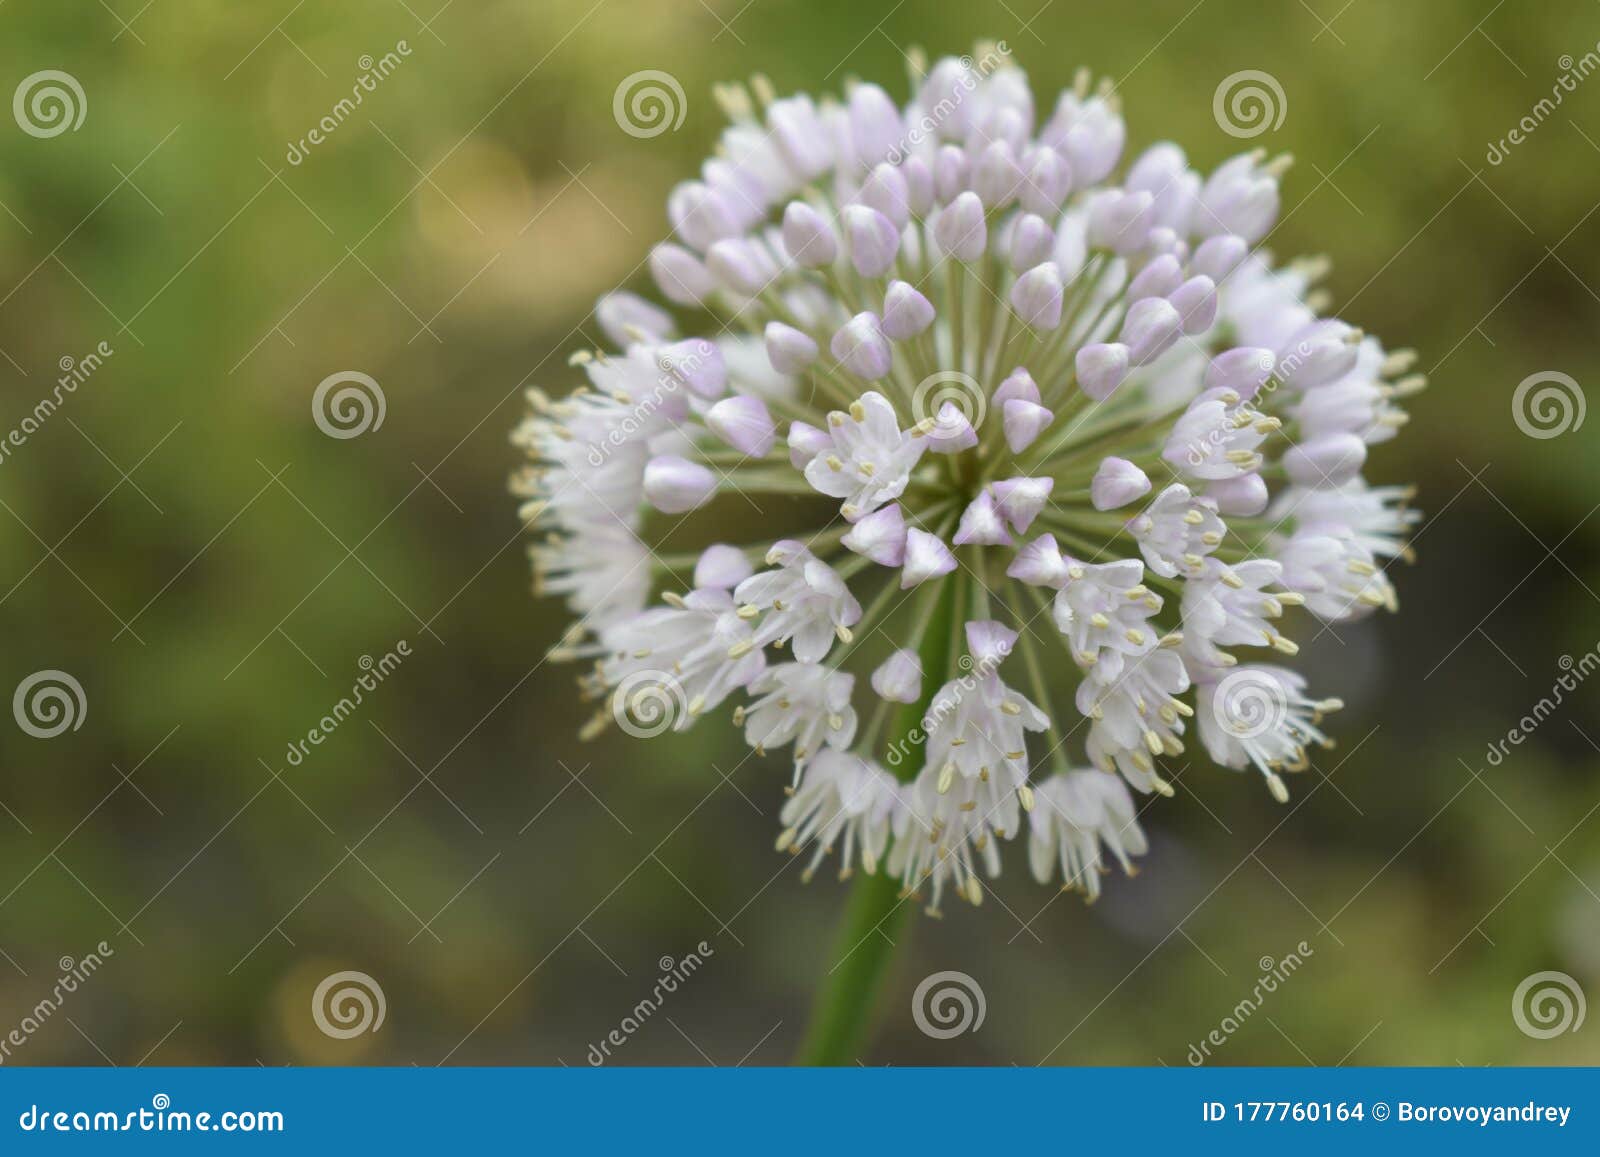 Selective Focus On Blooming Onion Flower With Nature Bokeh Background Allium Nigrum Flower Buds In Summer Stock Photo Image Of Nature Bulb 177760164